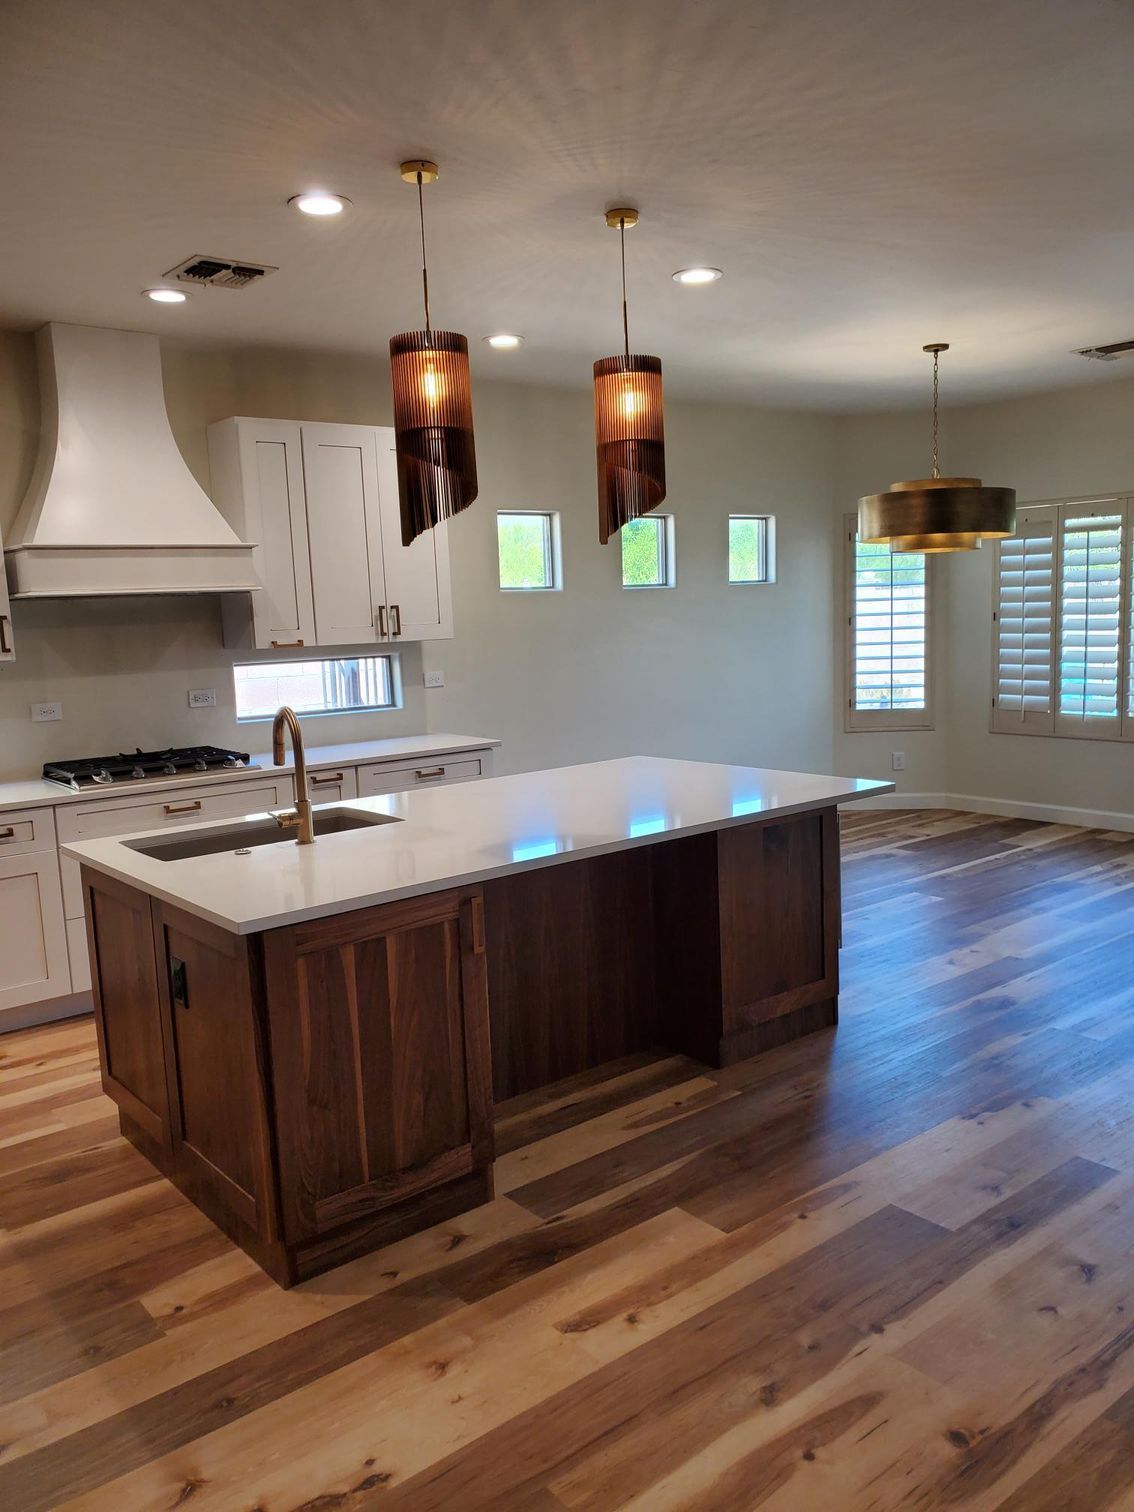 Spacious kitchen featuring breakfast bar, pendant lighting, white shaker cabinets, granite countertops, and hardwood flooring. Perfect for modern living. 